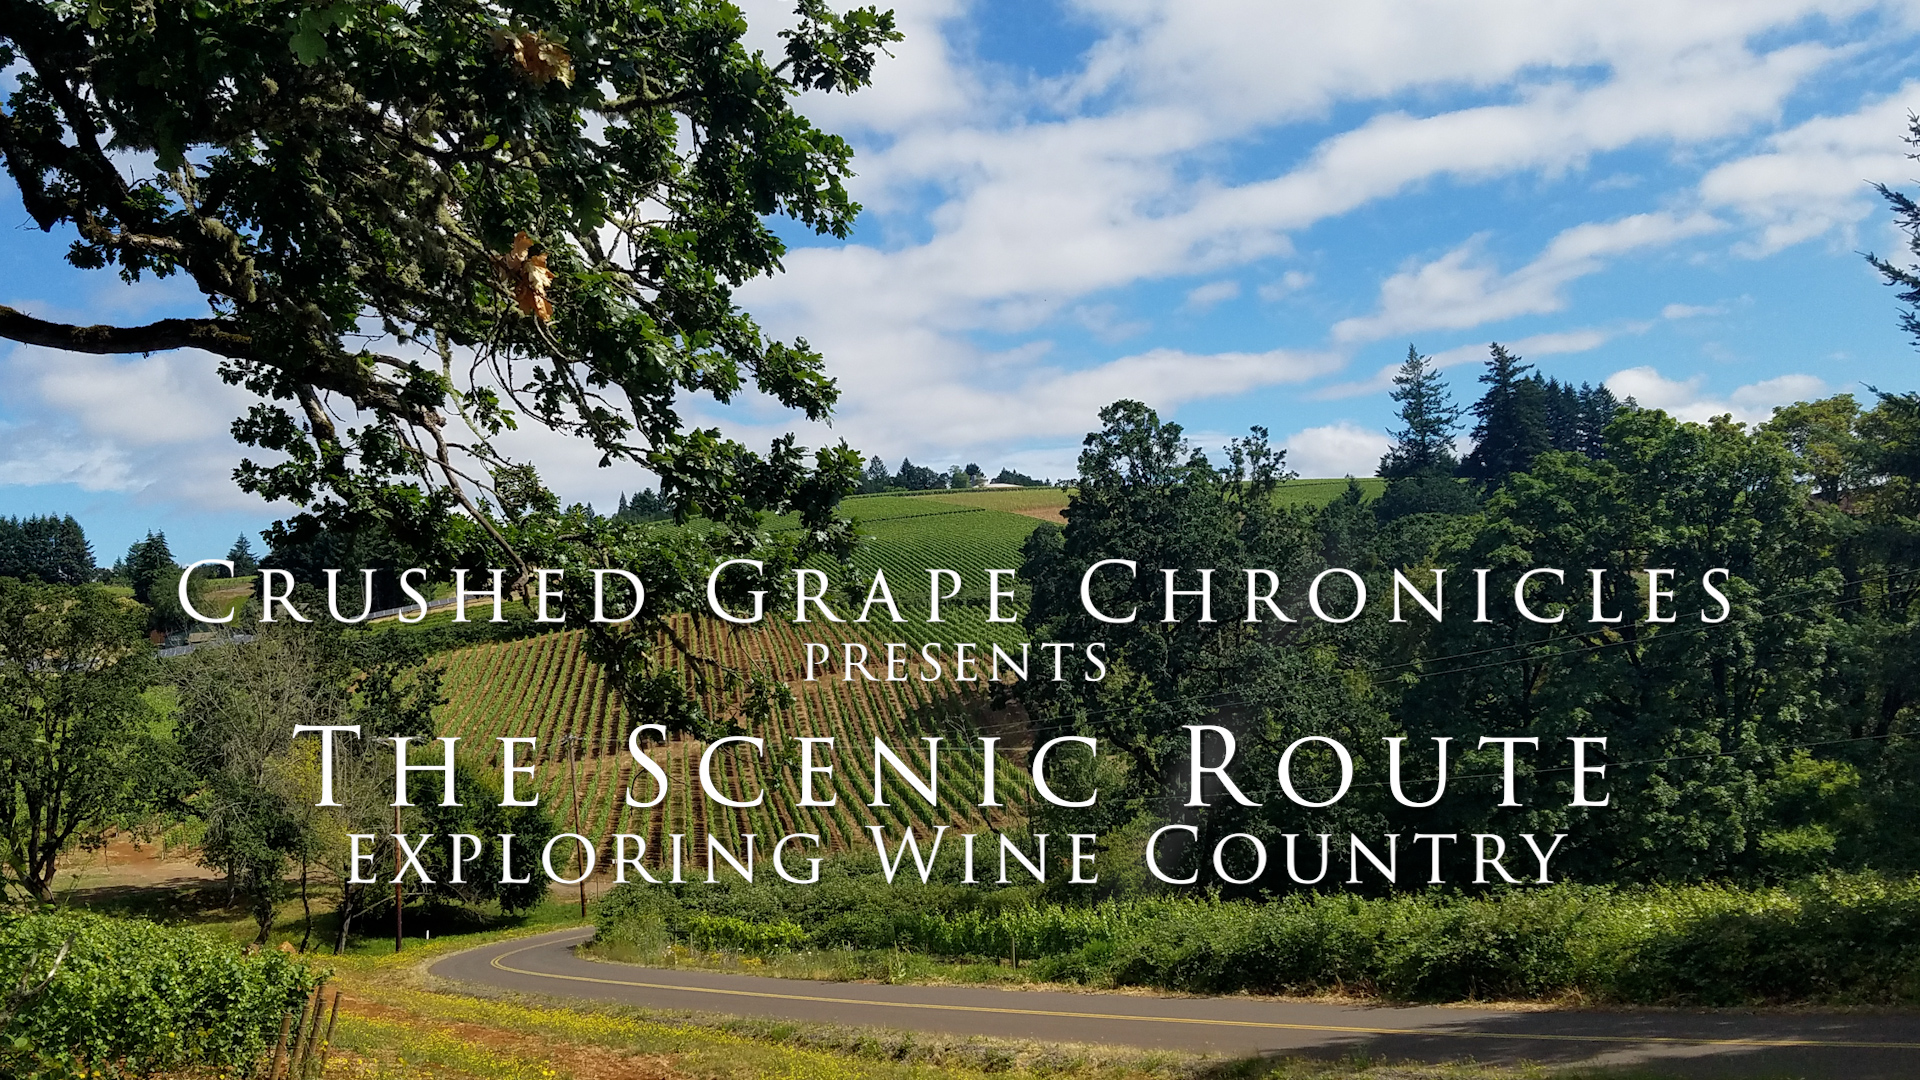 Crushed Grape Chronicles in Association with 42 Aspens Productions Releases "The Scenic Route" Season 1